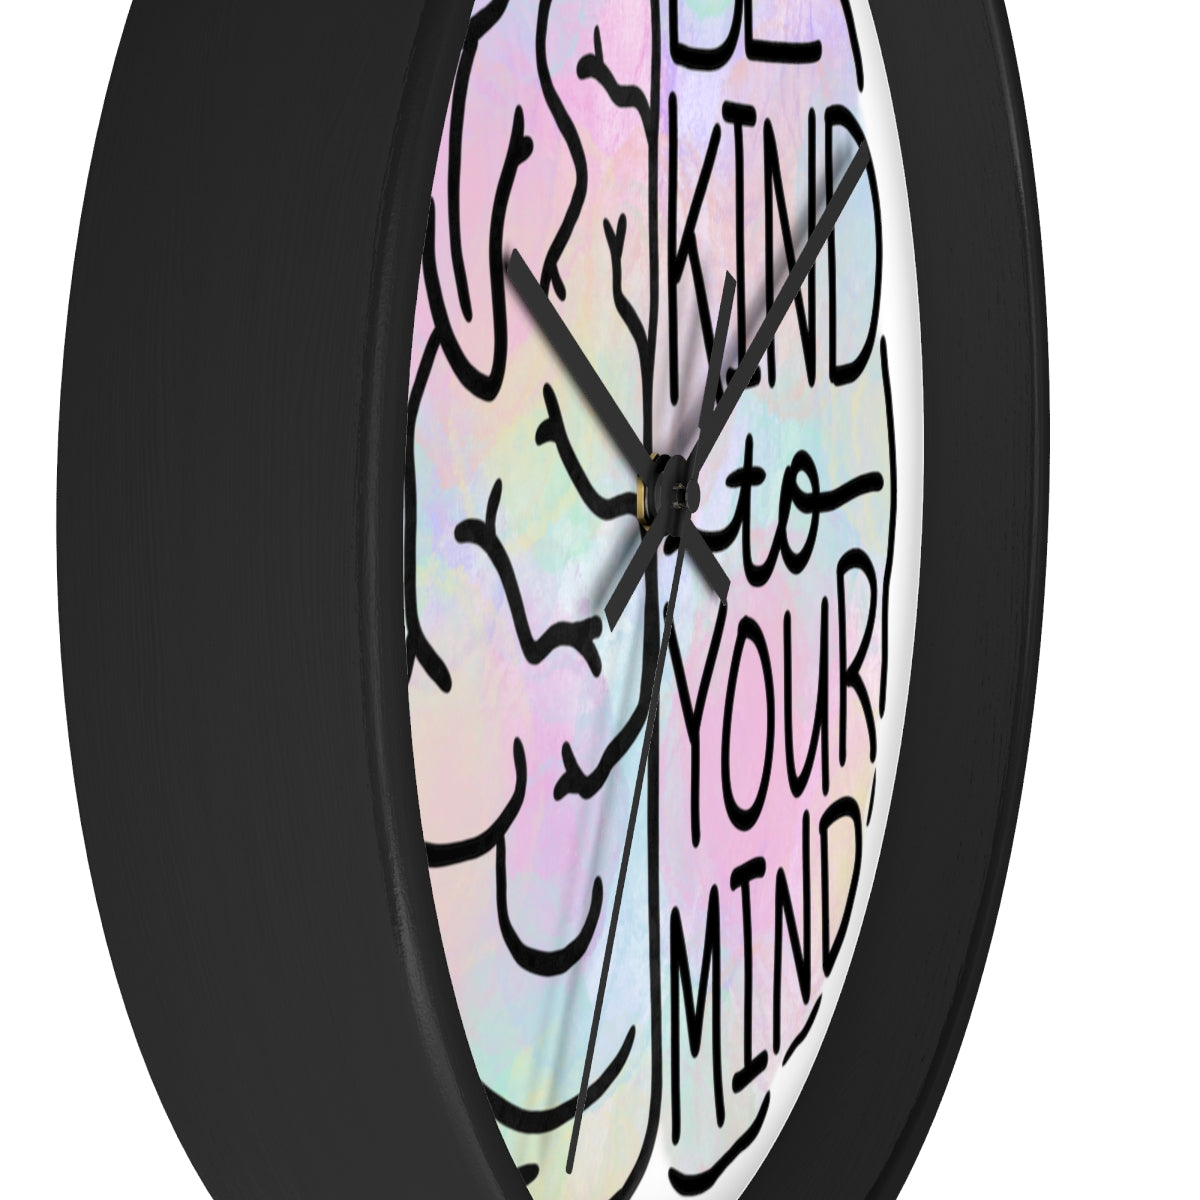 “Be Kind to Your Mind” Clock